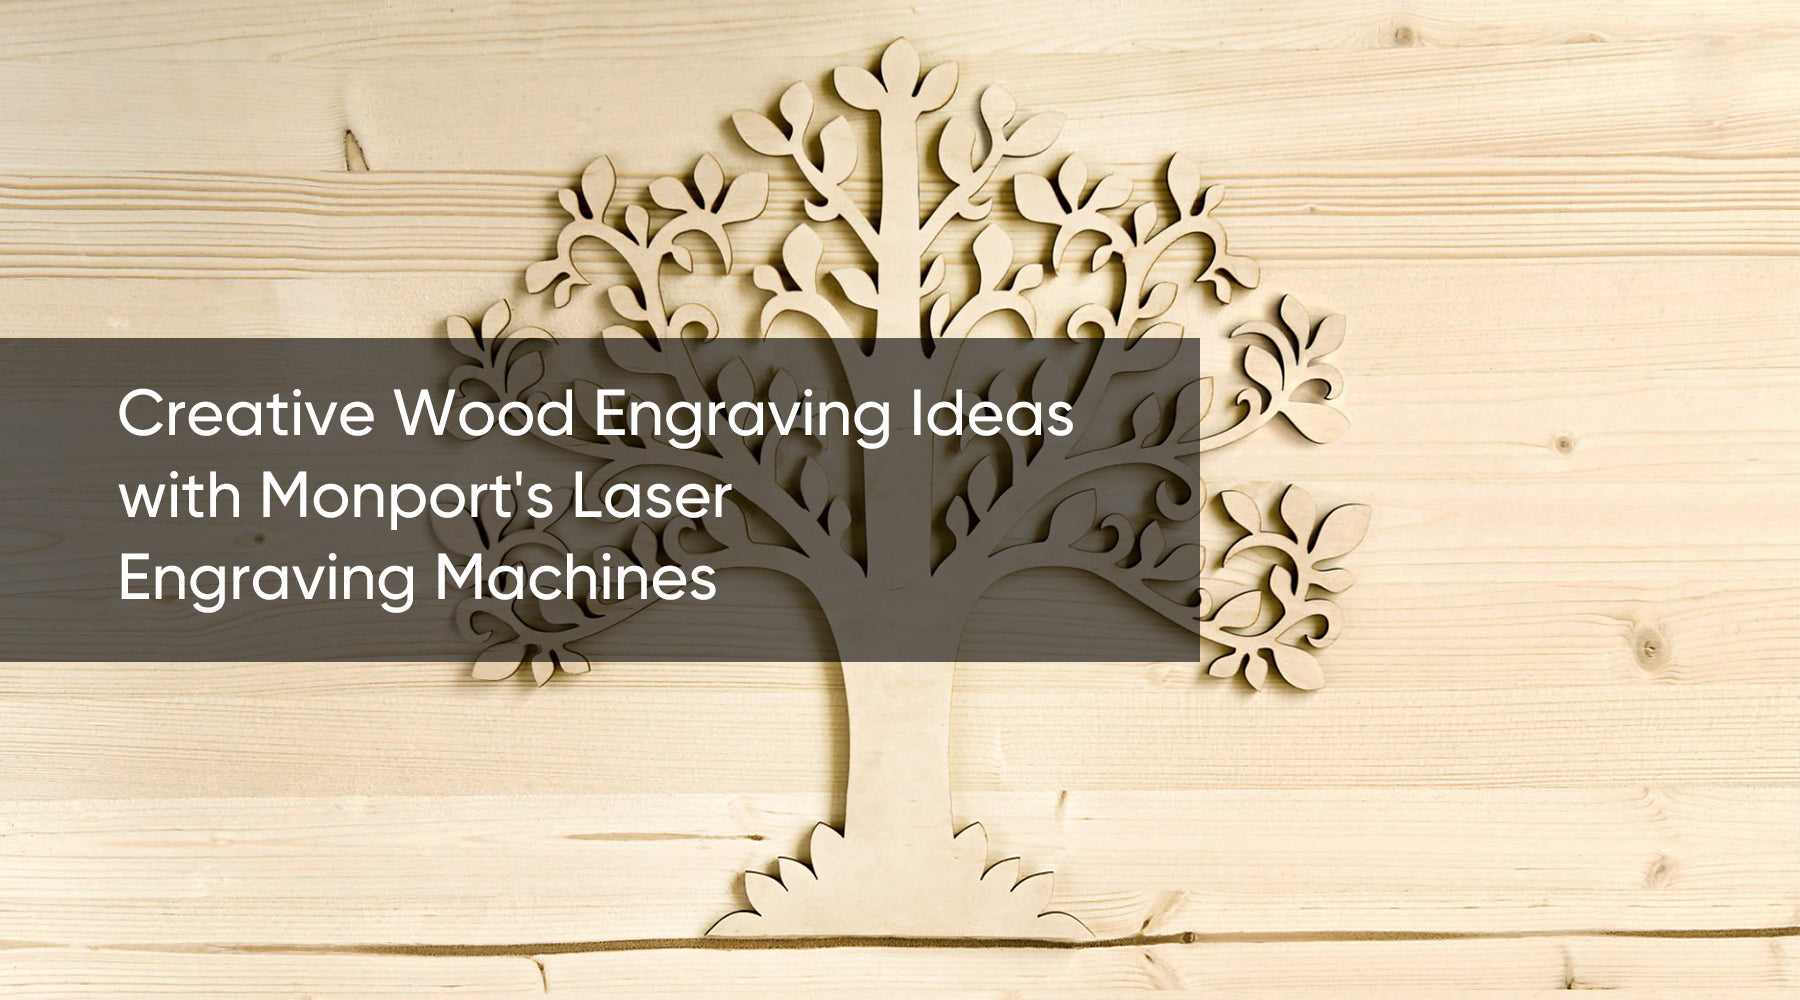 Creative Wood Engraving Ideas with Monport's Laser Engraving Machines